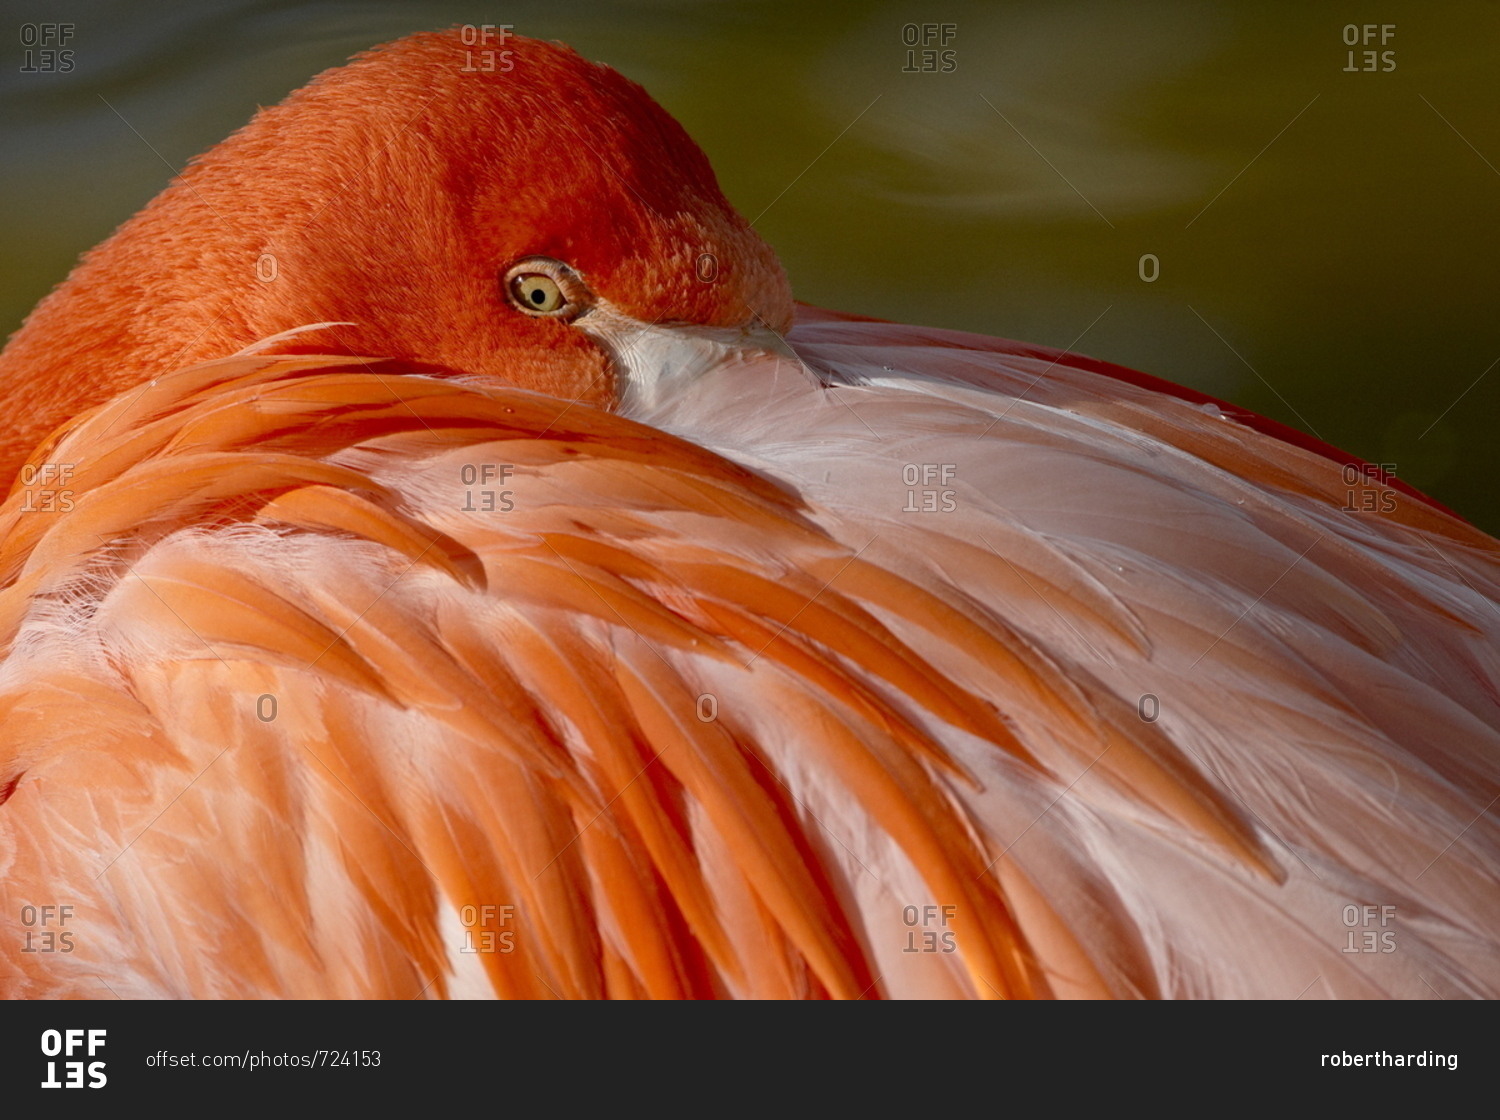 Caribbean flamingo (American flamingo (Phoenicopterus ruber ruber) with beak nestled in the feathers of its back, Rio Grande Zoo, Albuquerque Biological Park, Albuquerque, New Mexico, United States of America, North America